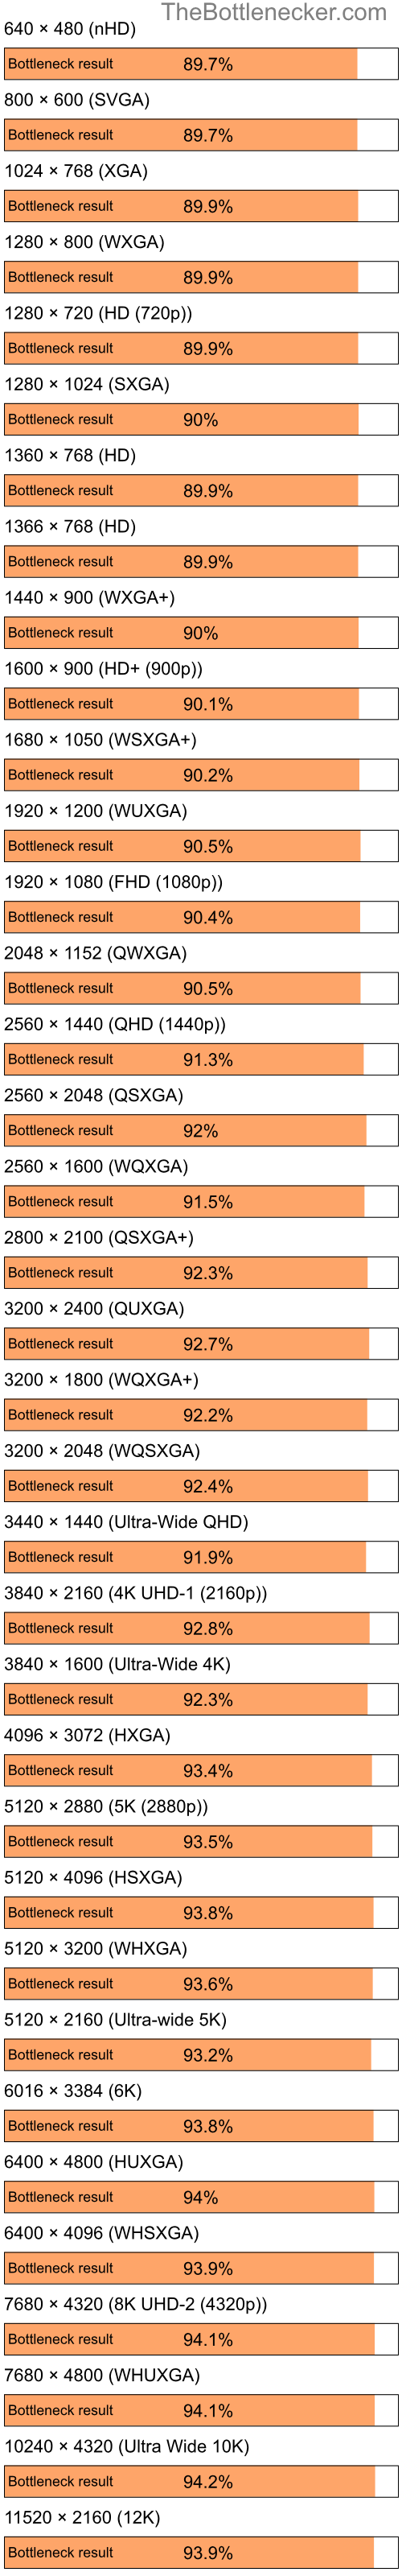 Bottleneck results by resolution for Intel Celeron M and NVIDIA GeForce FX 5200 in Graphic Card Intense Tasks